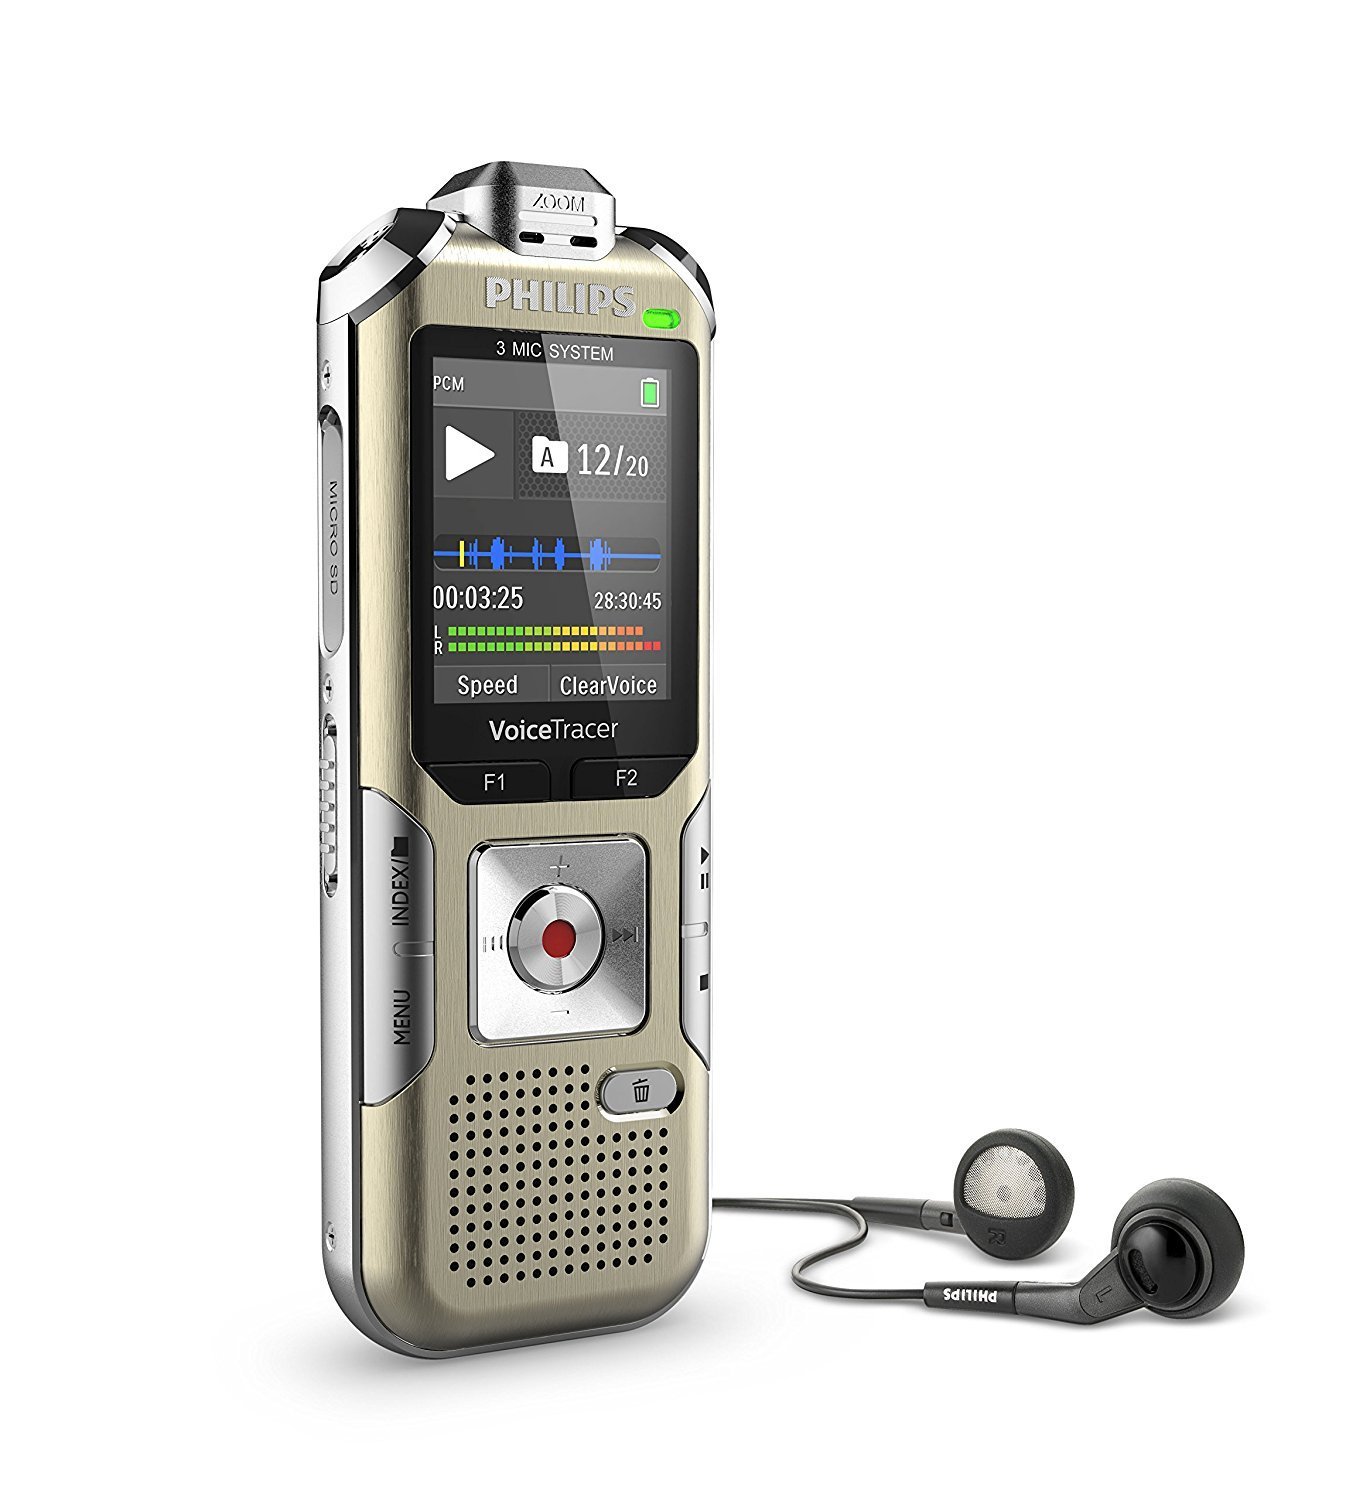 PHILIPS DVT8010 Voice Tracer Audio Recorder Remote Control Gold